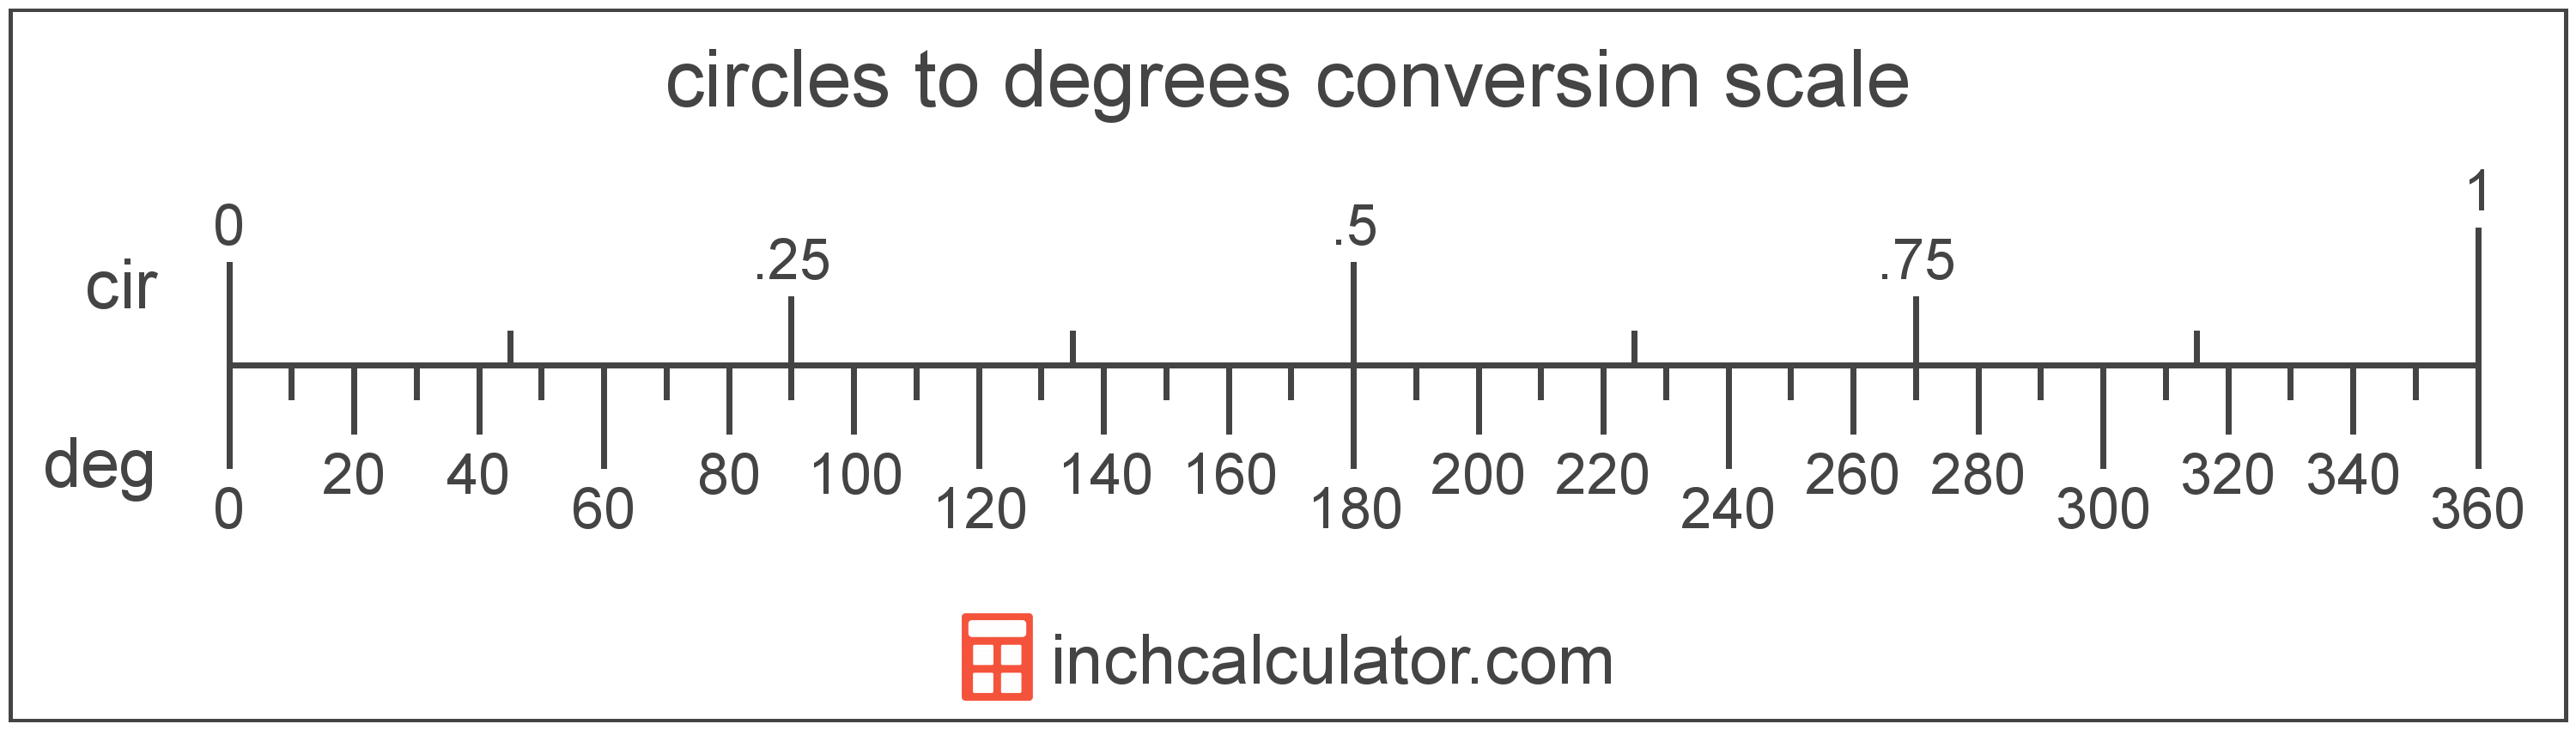 conversion scale showing circles and equivalent degrees angle values